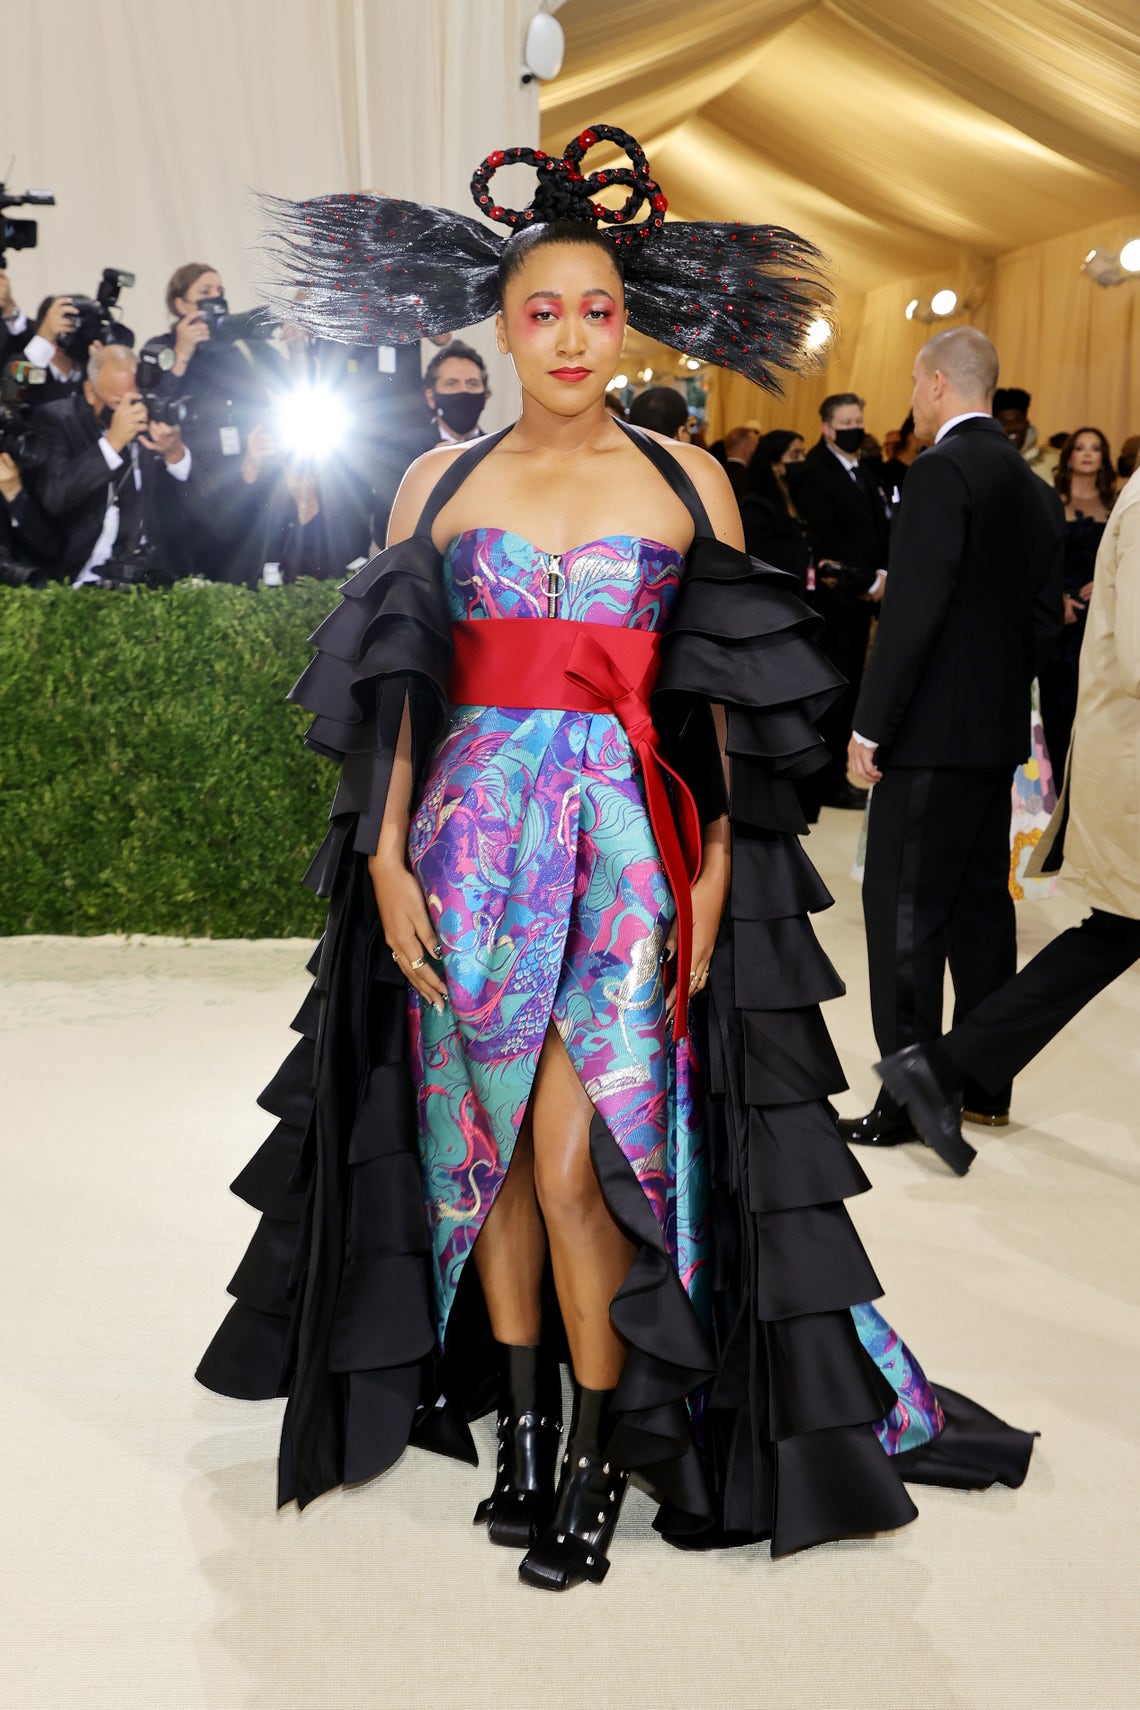 A closer look: Louis Vuitton at the Met Gala 